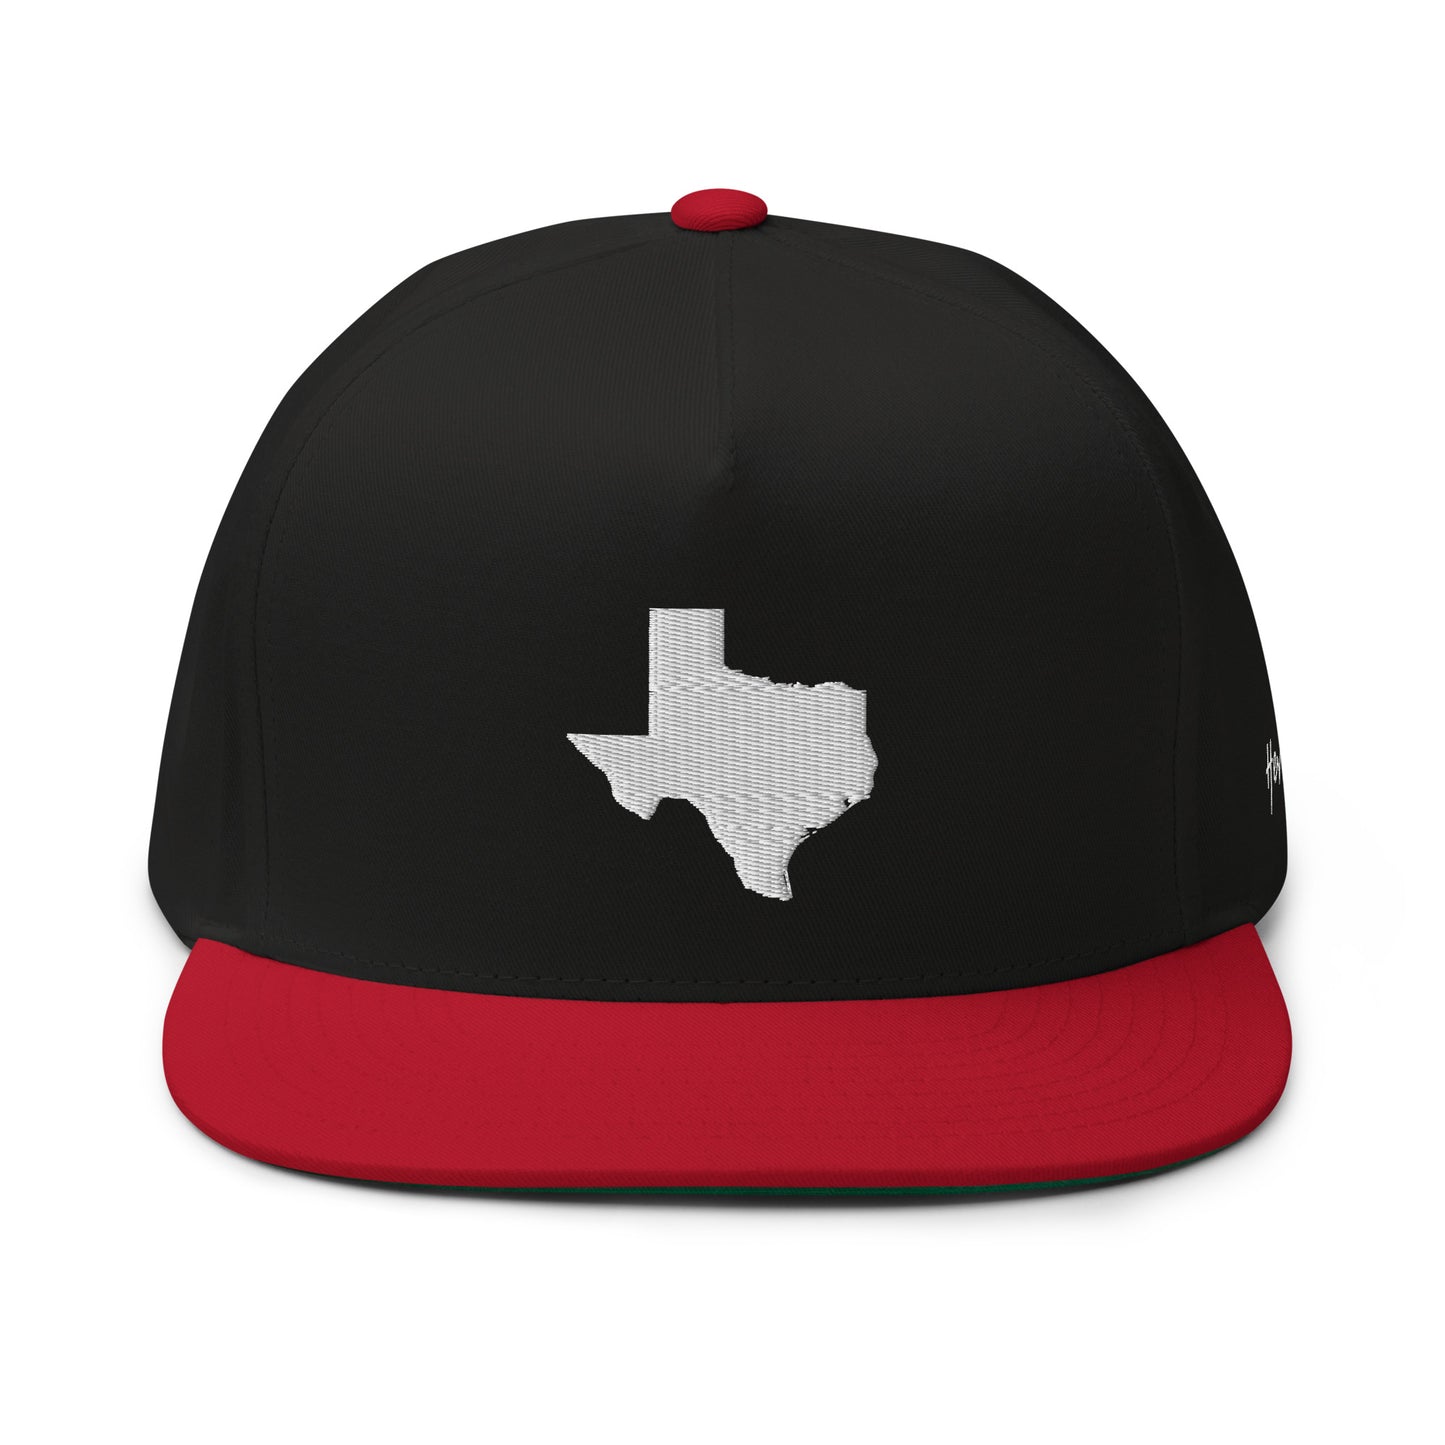 Texas State Silhouette 5 Panel A-Frame Snapback Hat